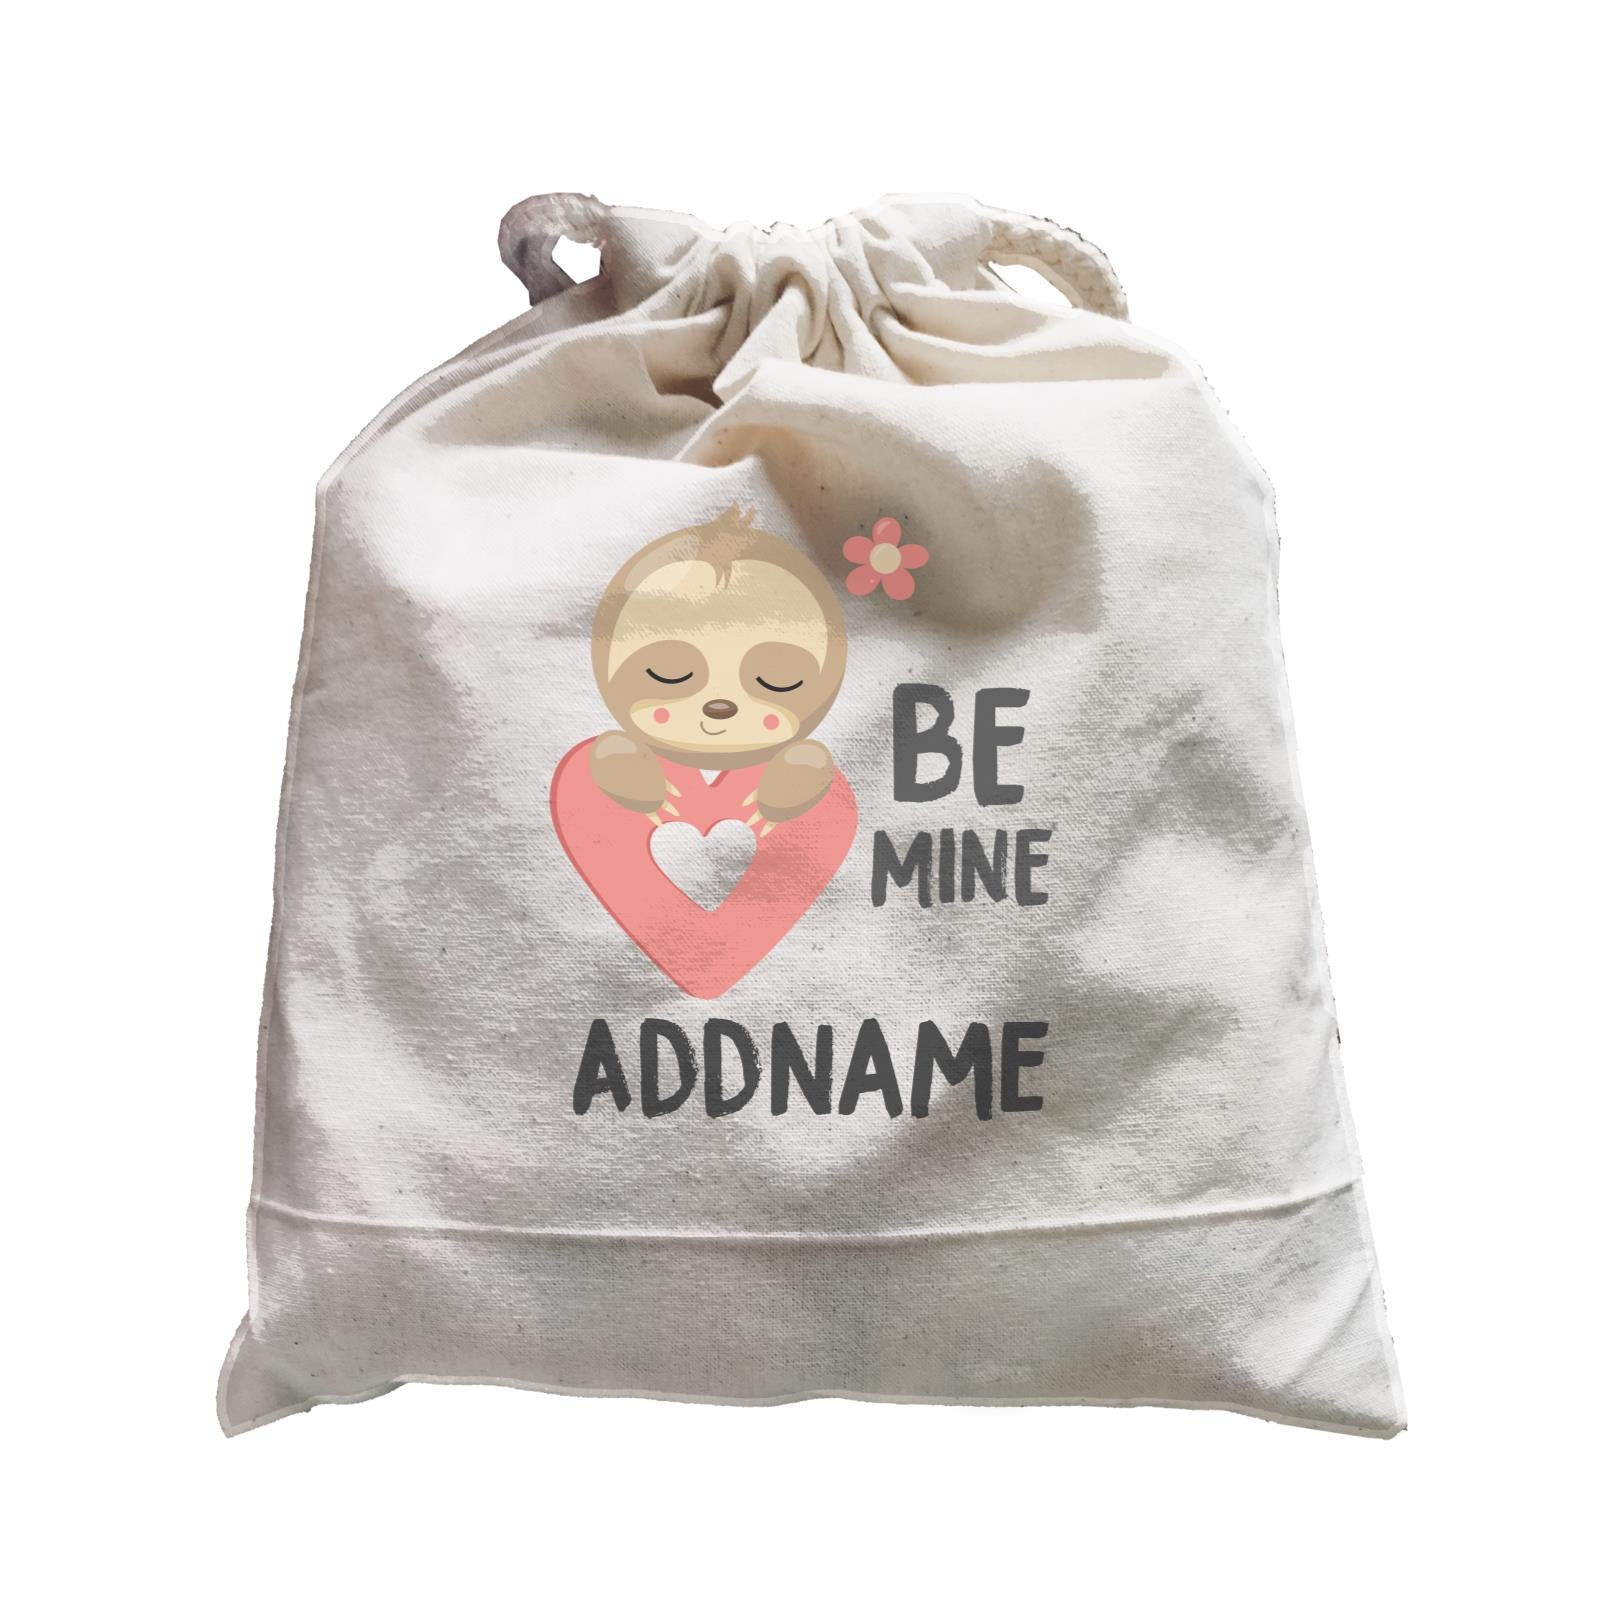 Cute Sloth Be Mine with Heart Addname Satchel